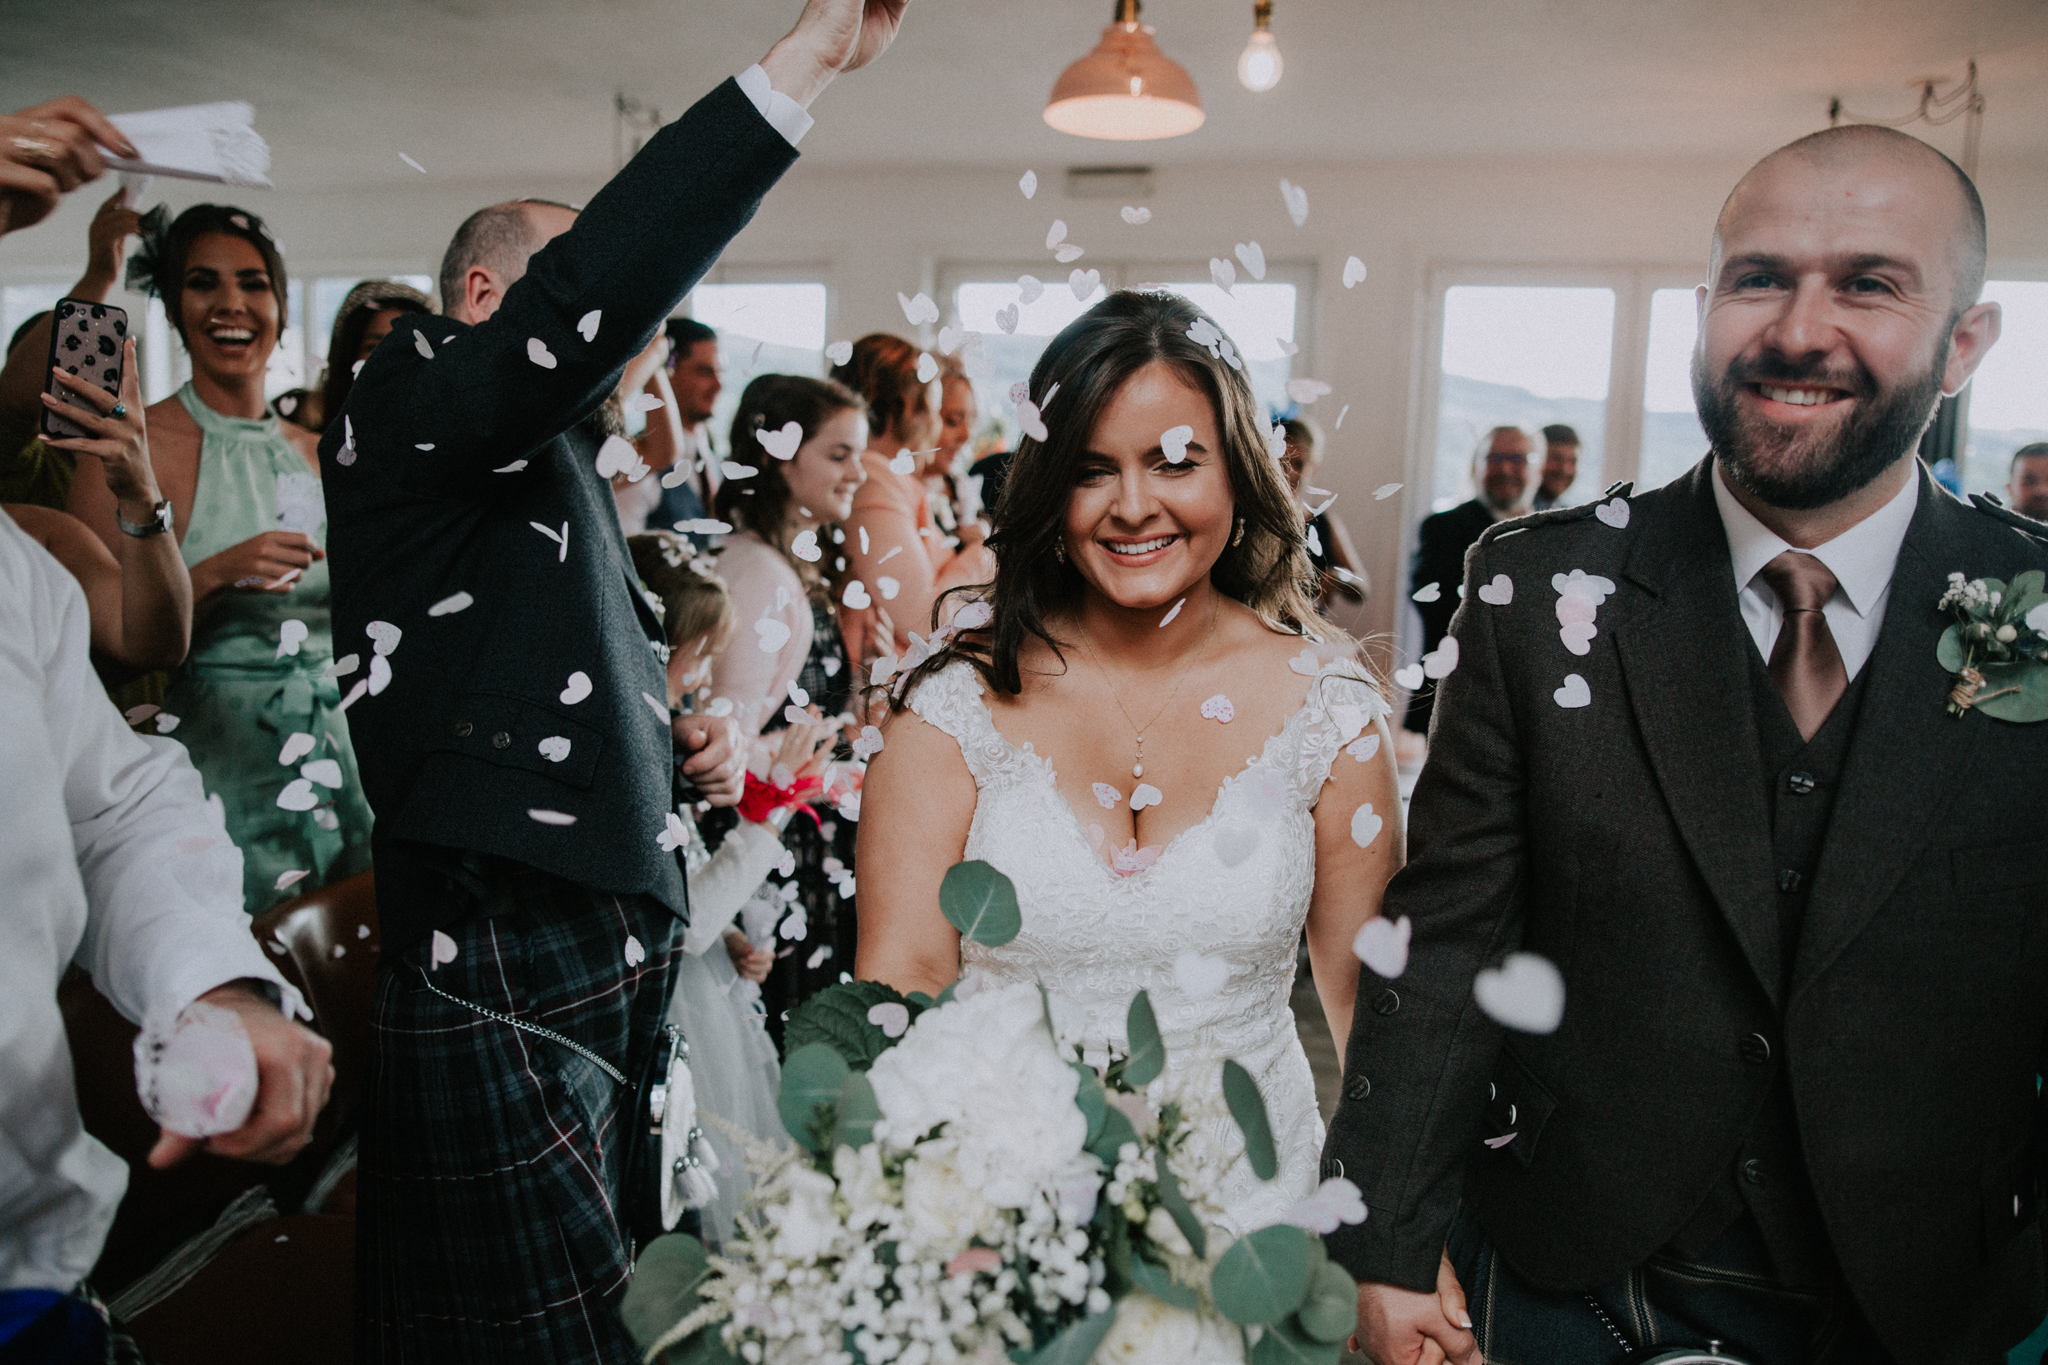 A Countryside & Relaxed Wedding at Venachar Lochside | Loch Lomond Wedding  Photographer â€” In the Name of Love Photography